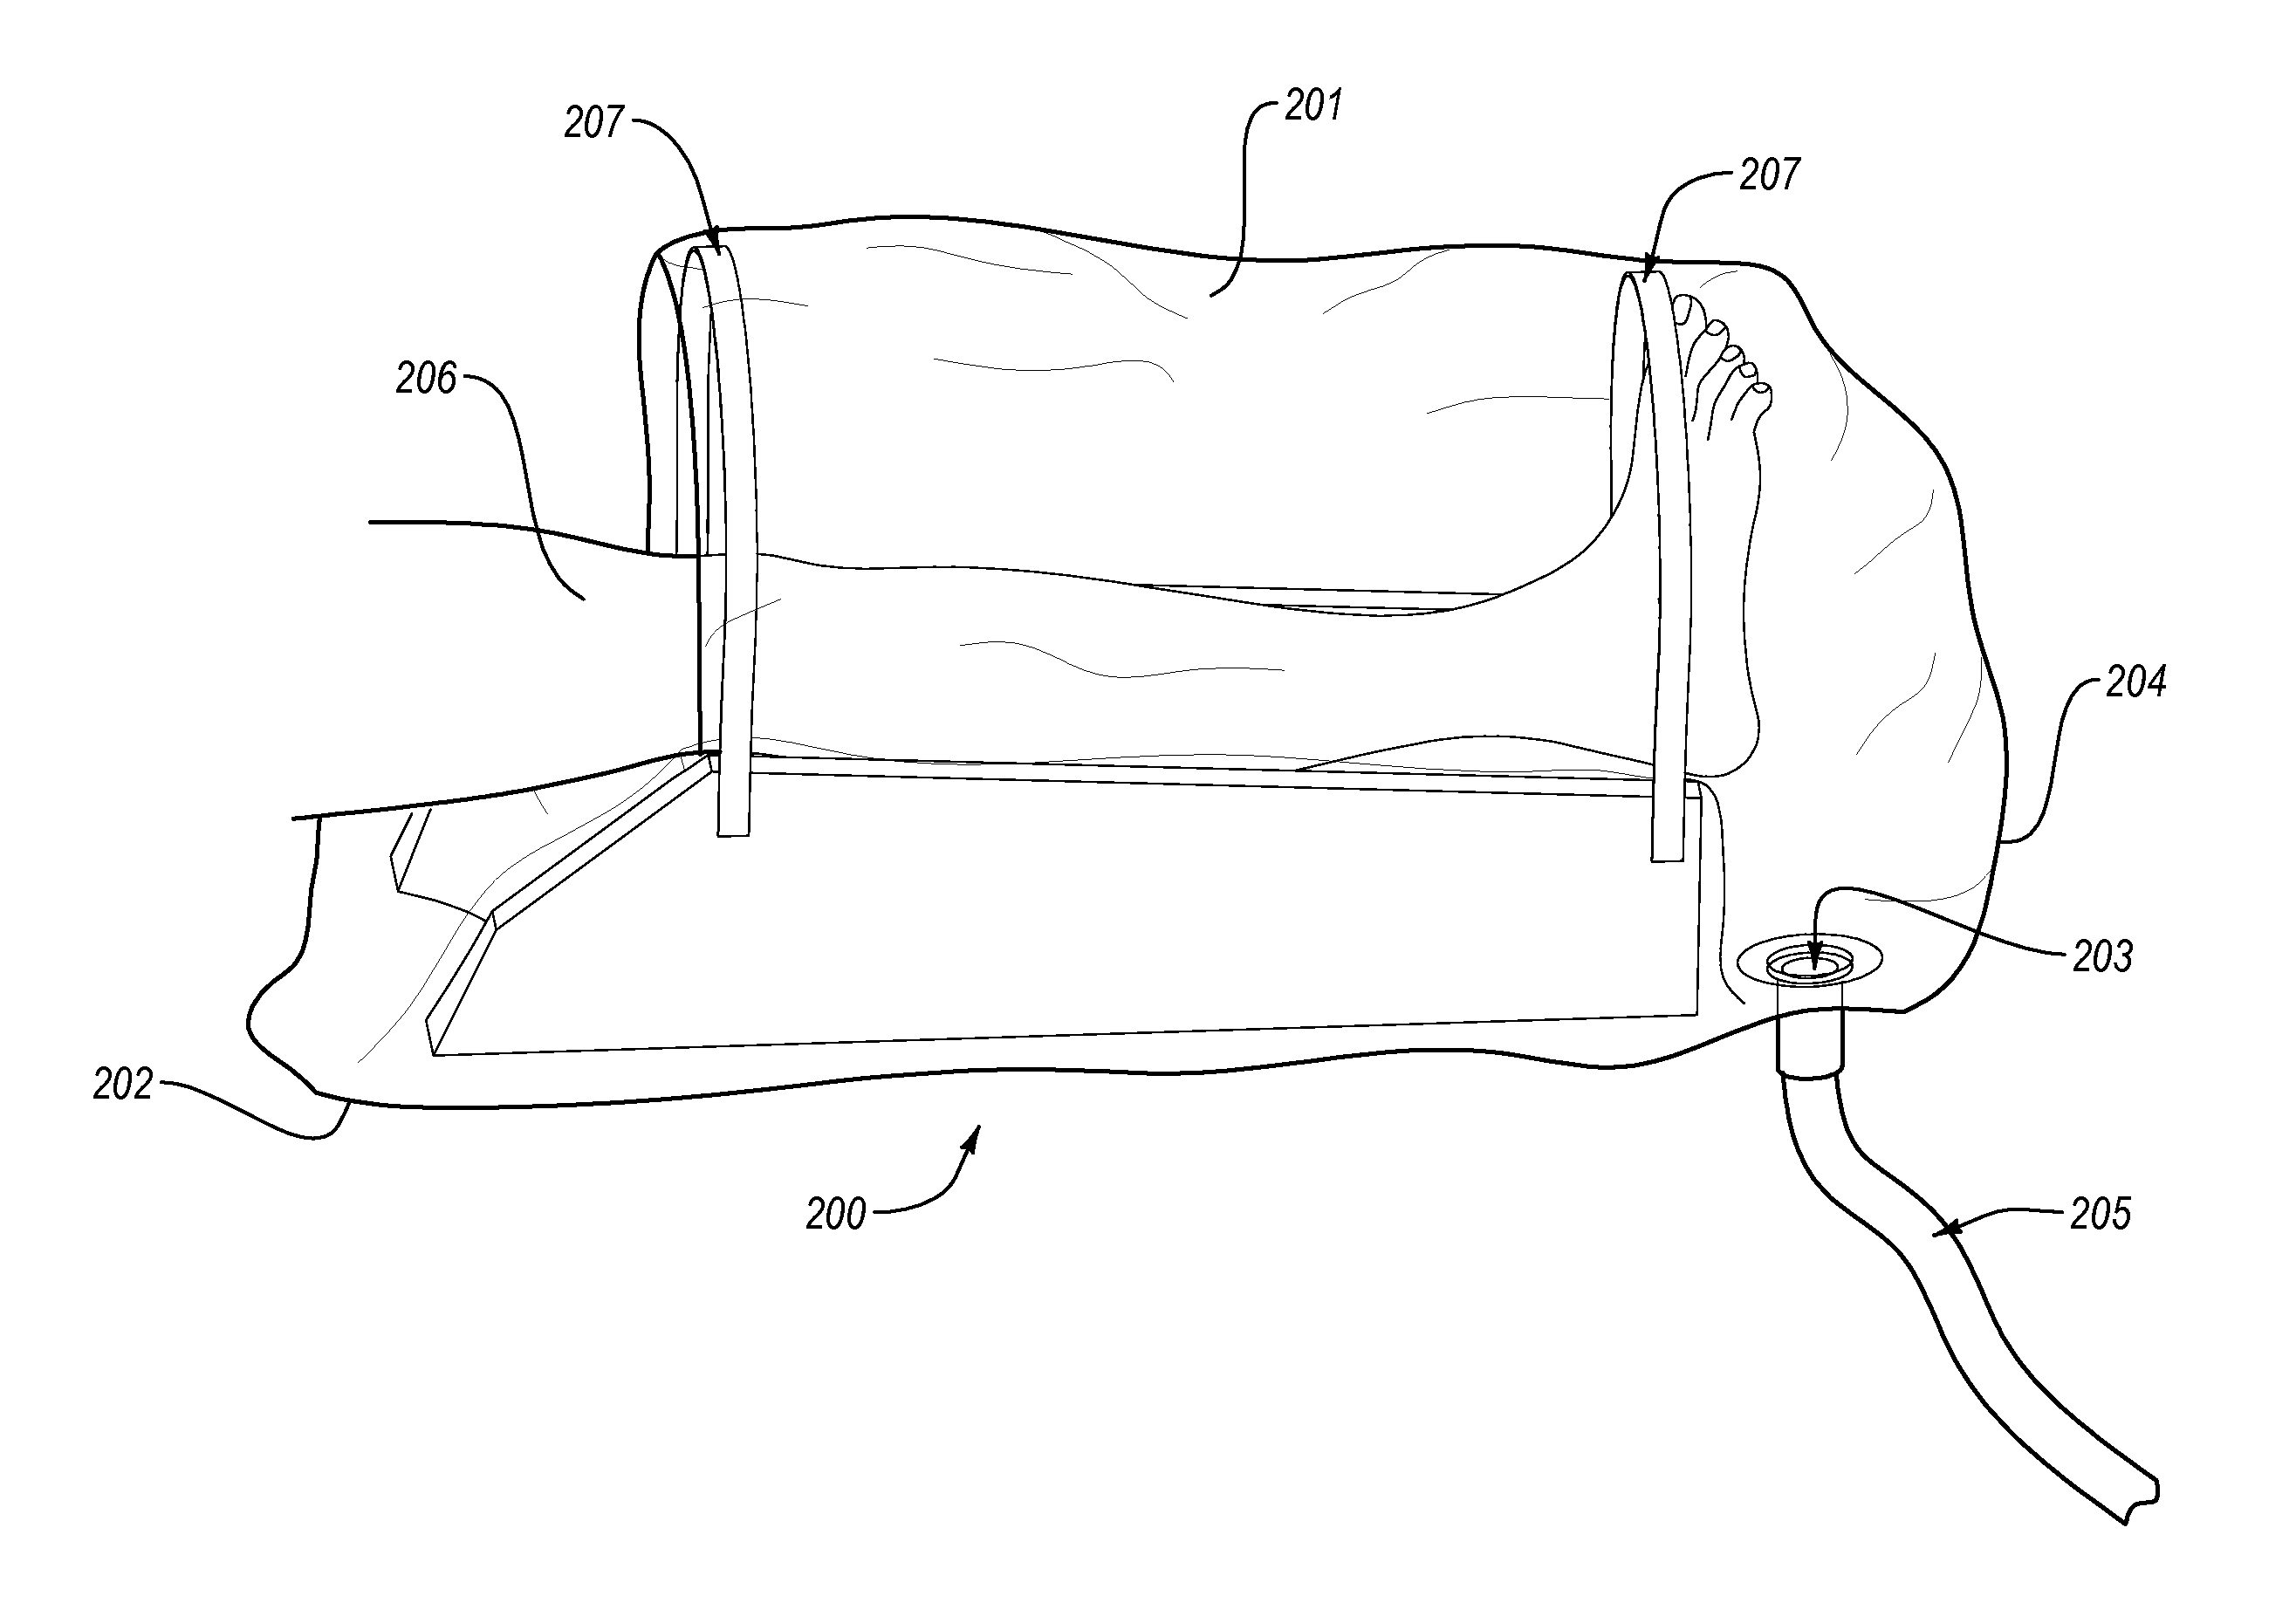 Medical irrigation device and method